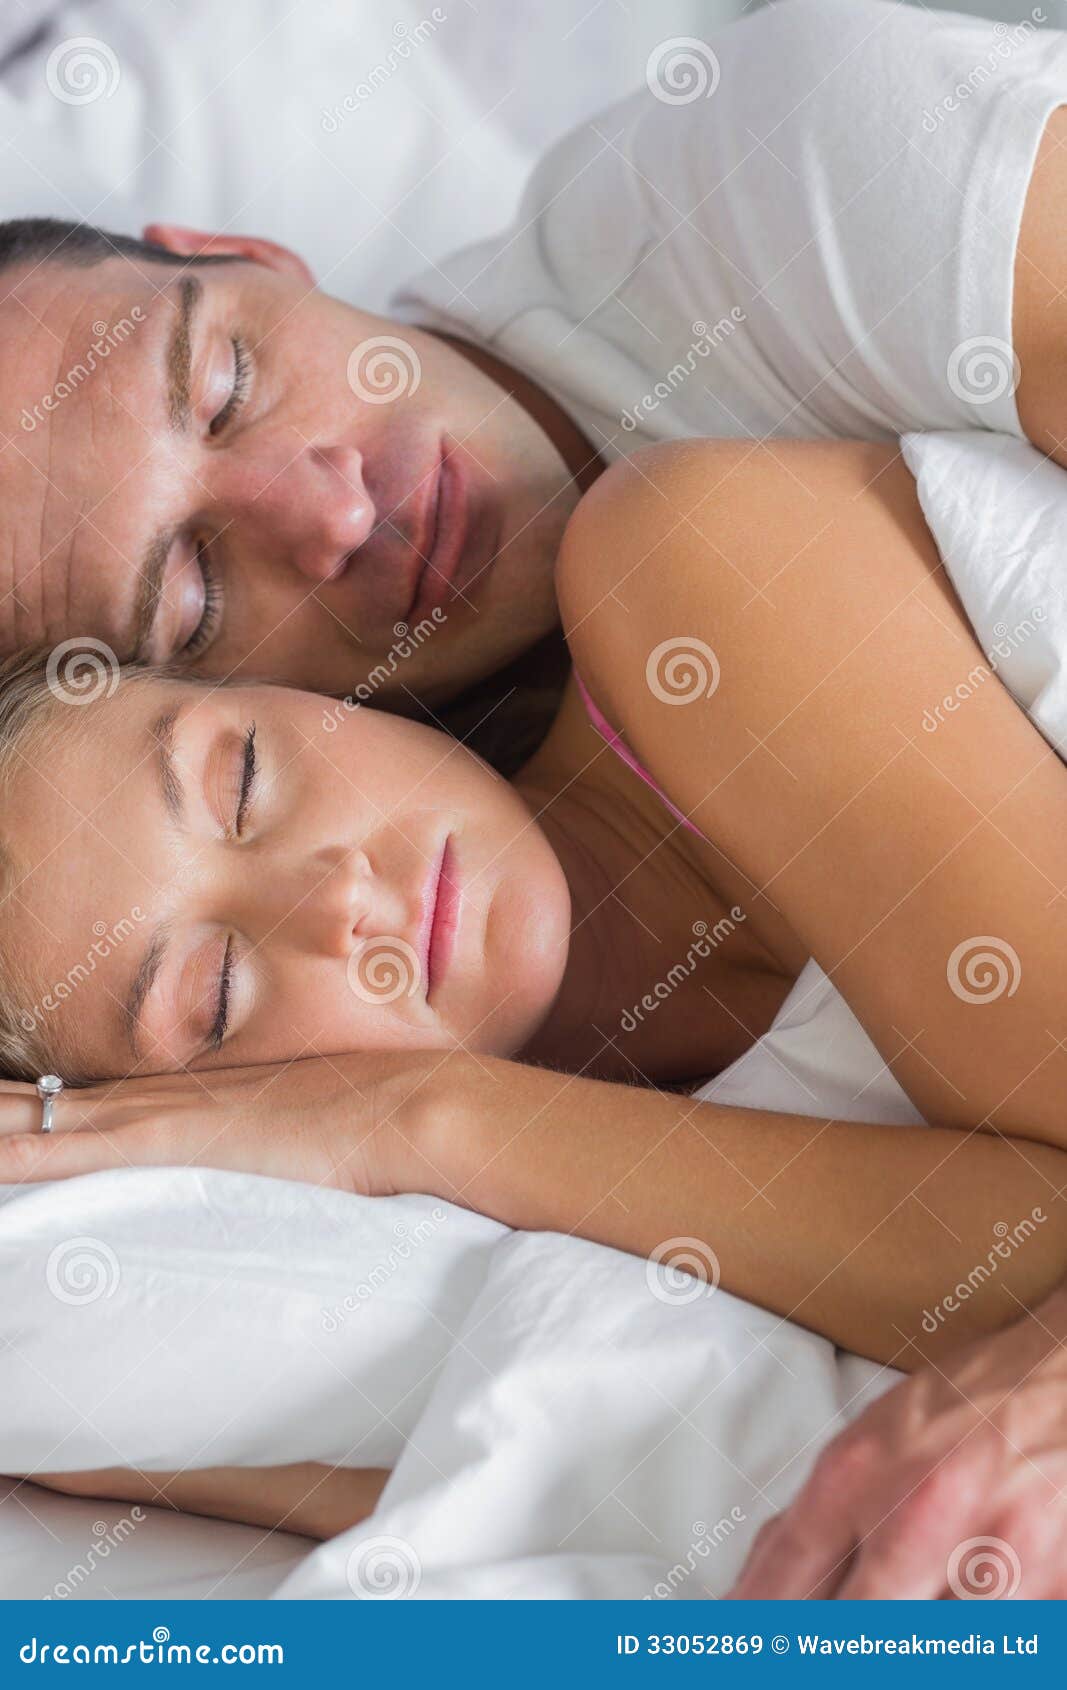 brian carrihill add couples spooning in bed photo